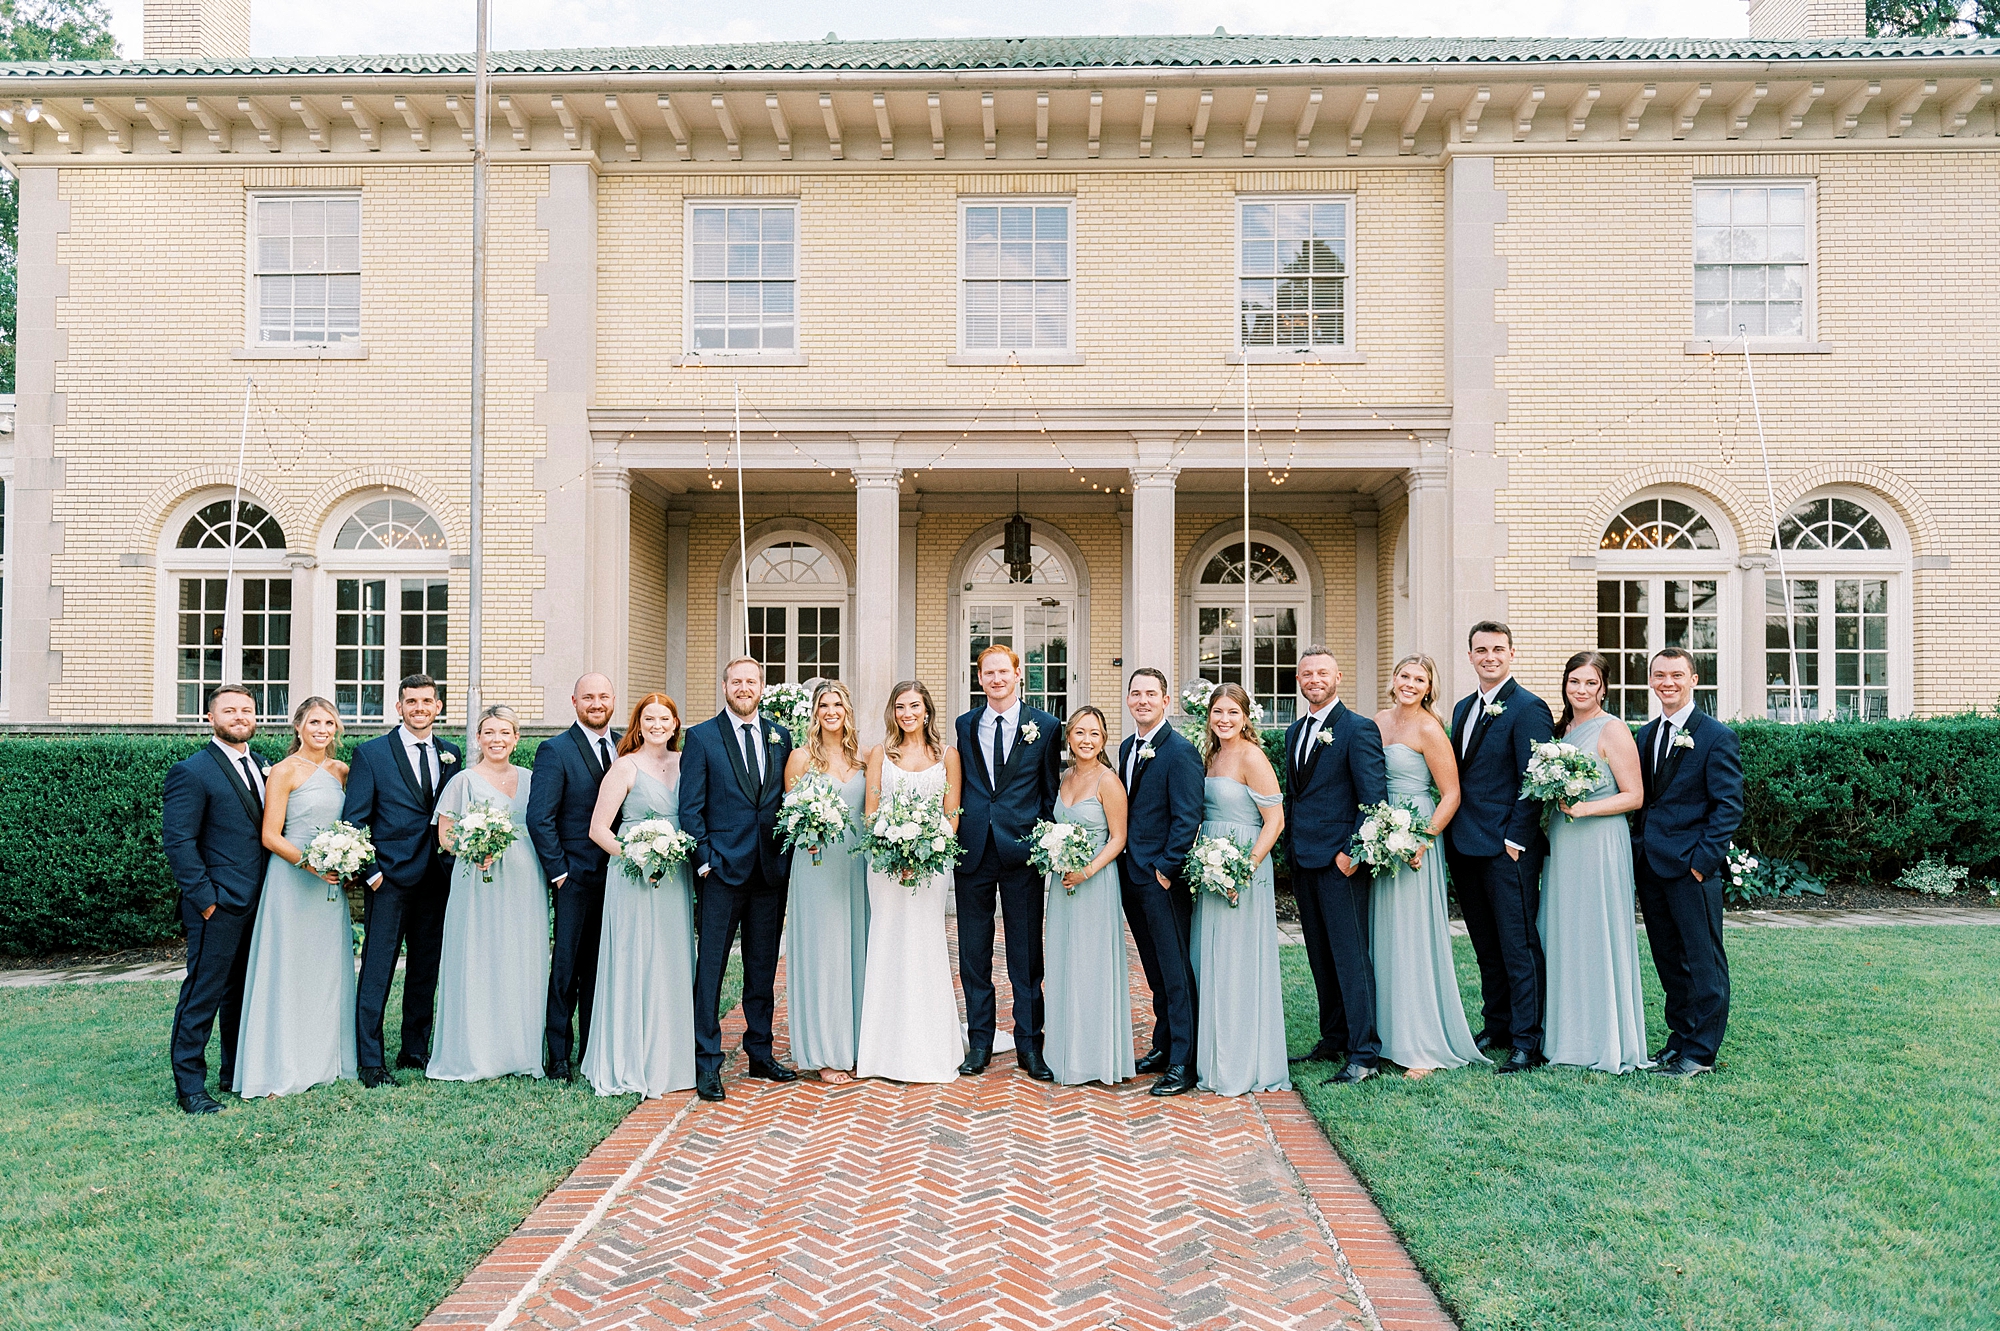 bride and groom stand with wedding party in light blue gowns and navy suits